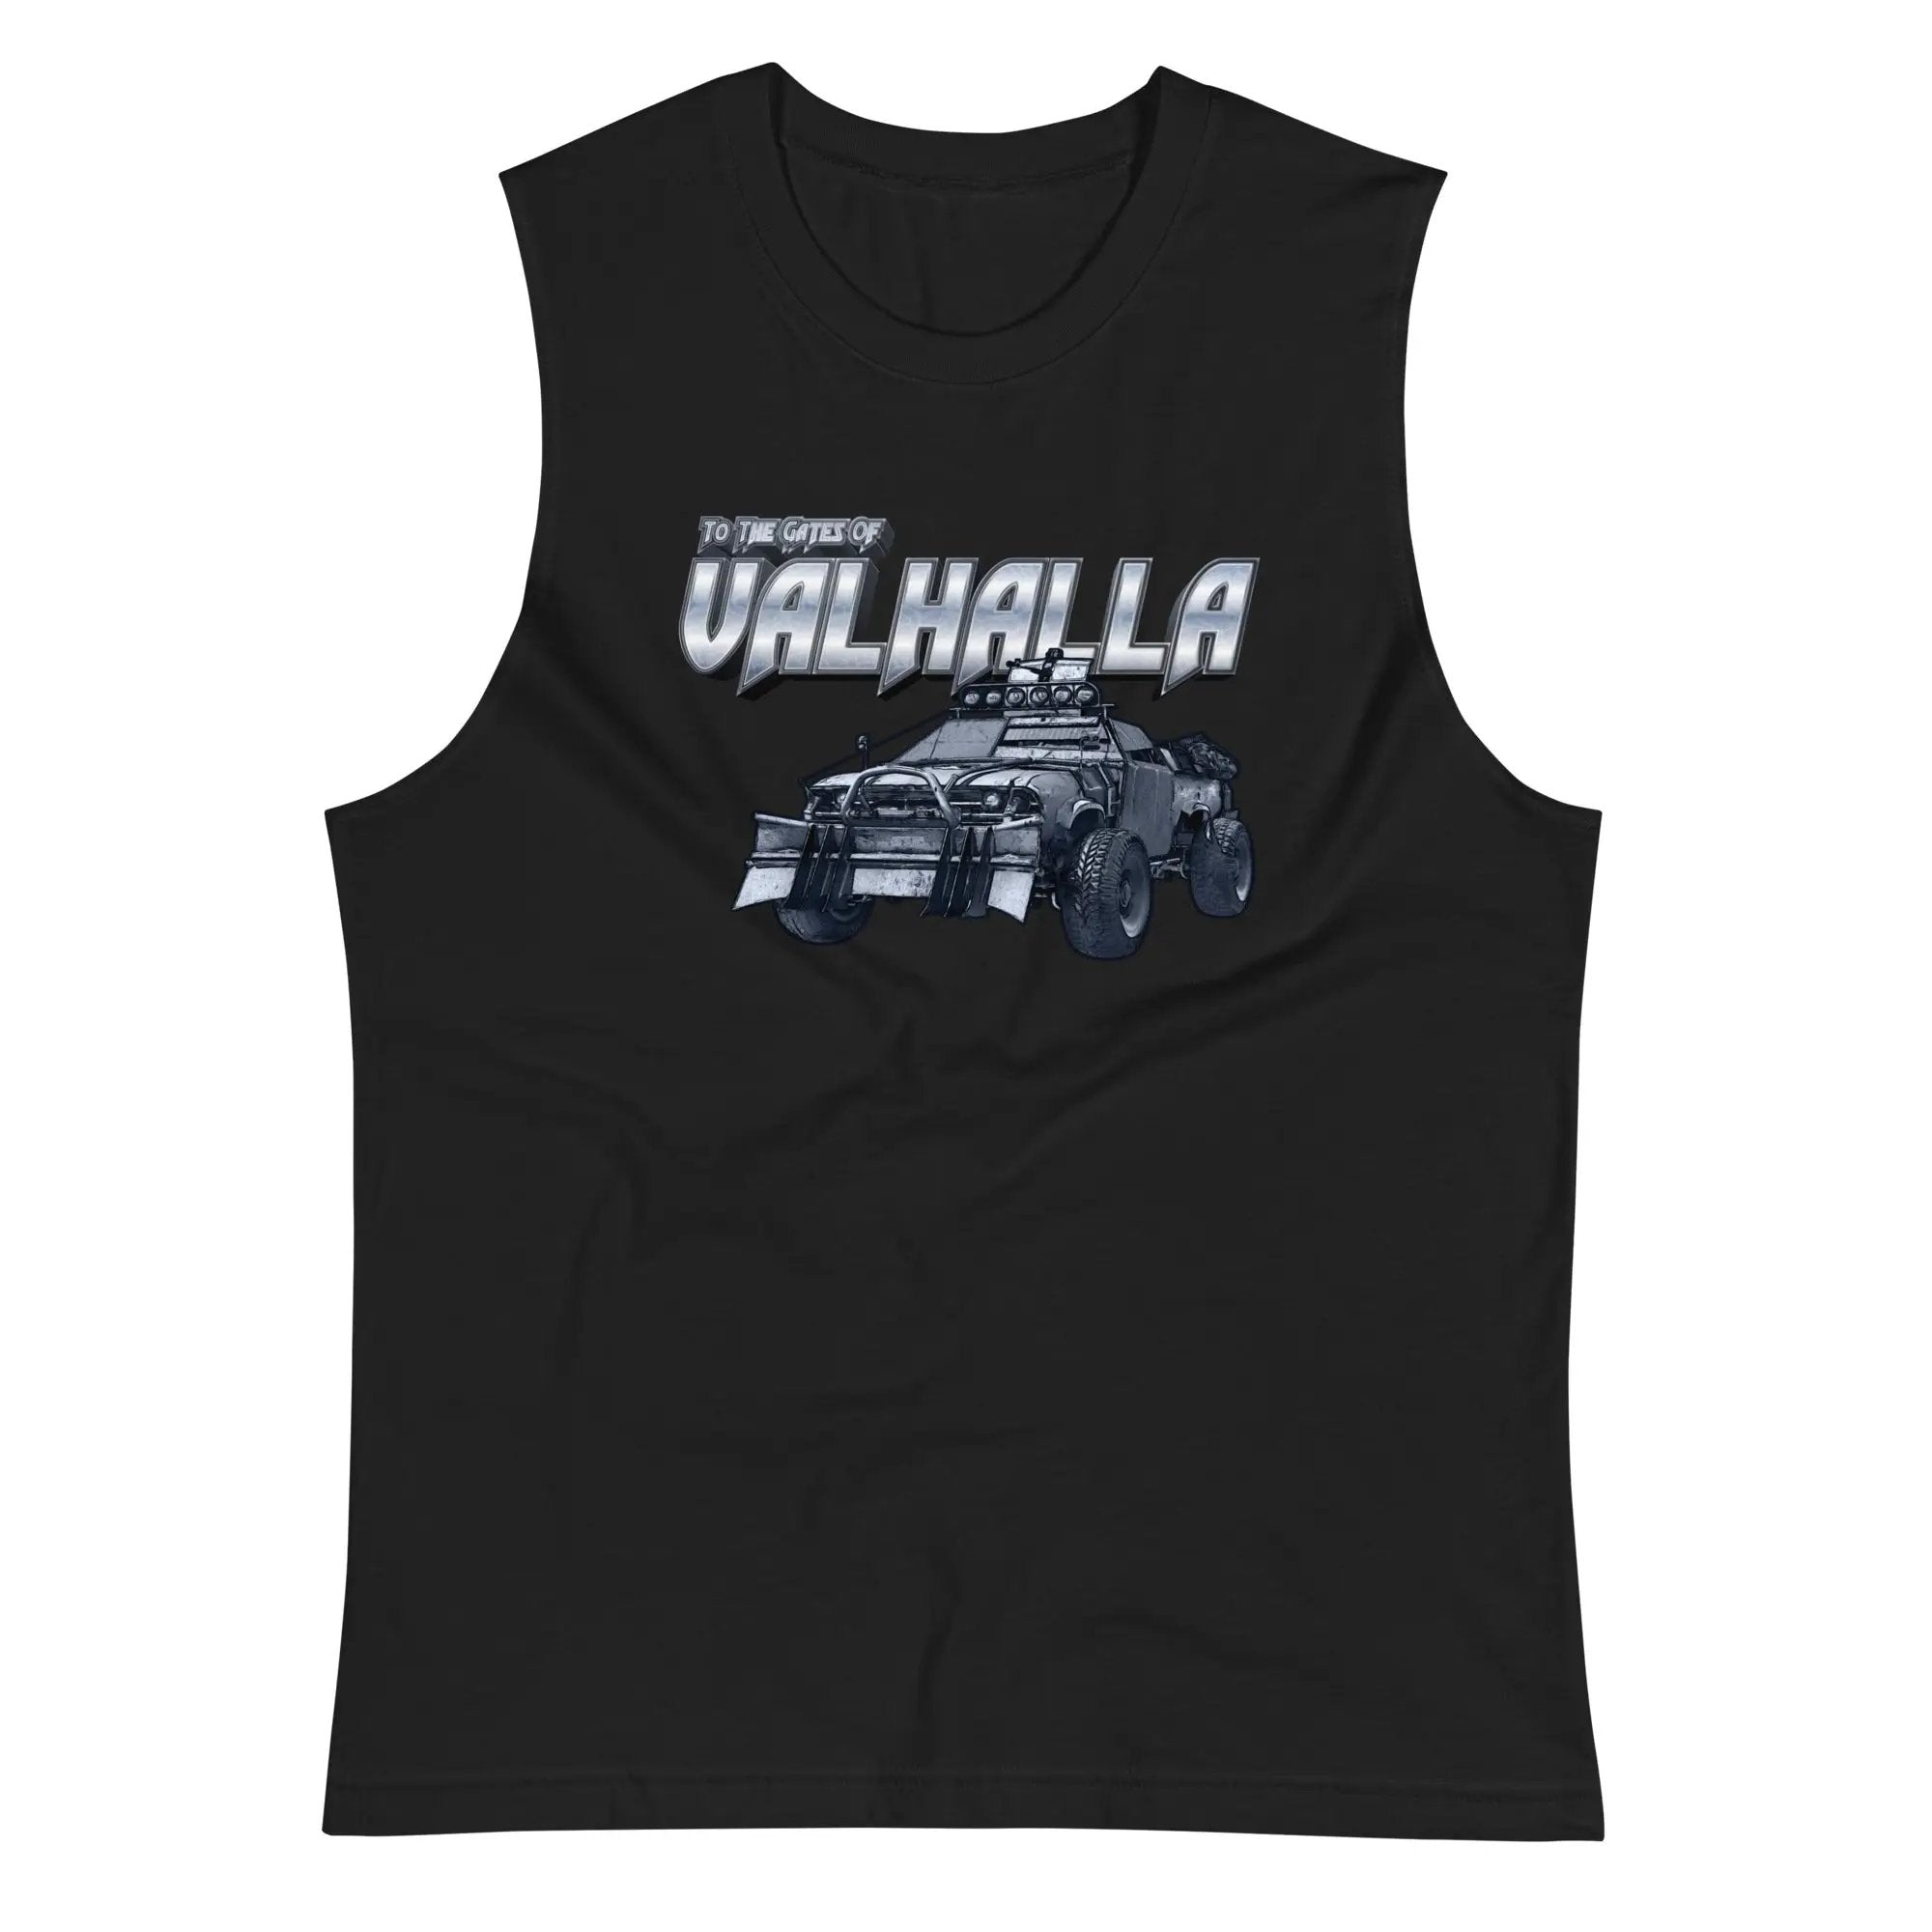 a black tank top with a picture of a car on it